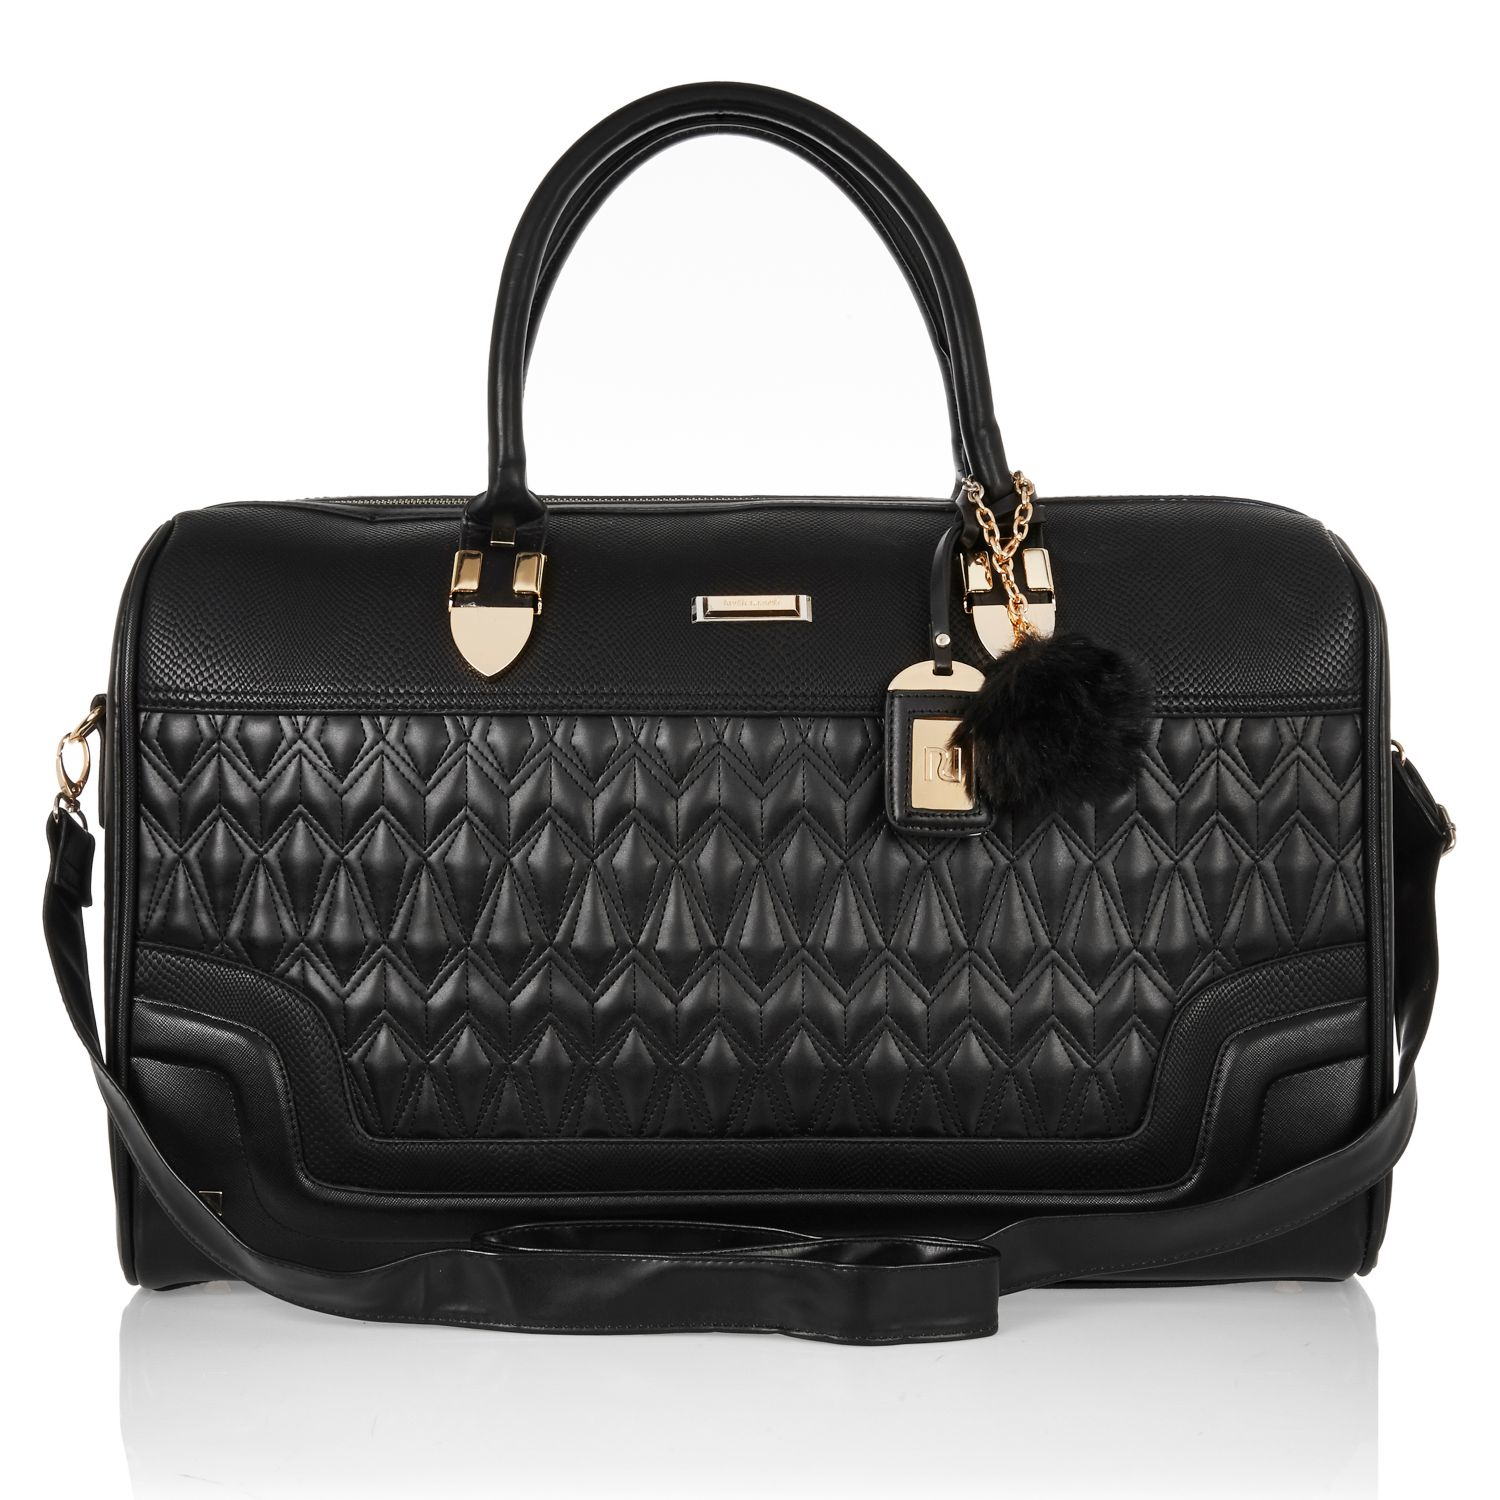 River Island Leather Black Quilted Pom Pom Weekend Bag - Lyst